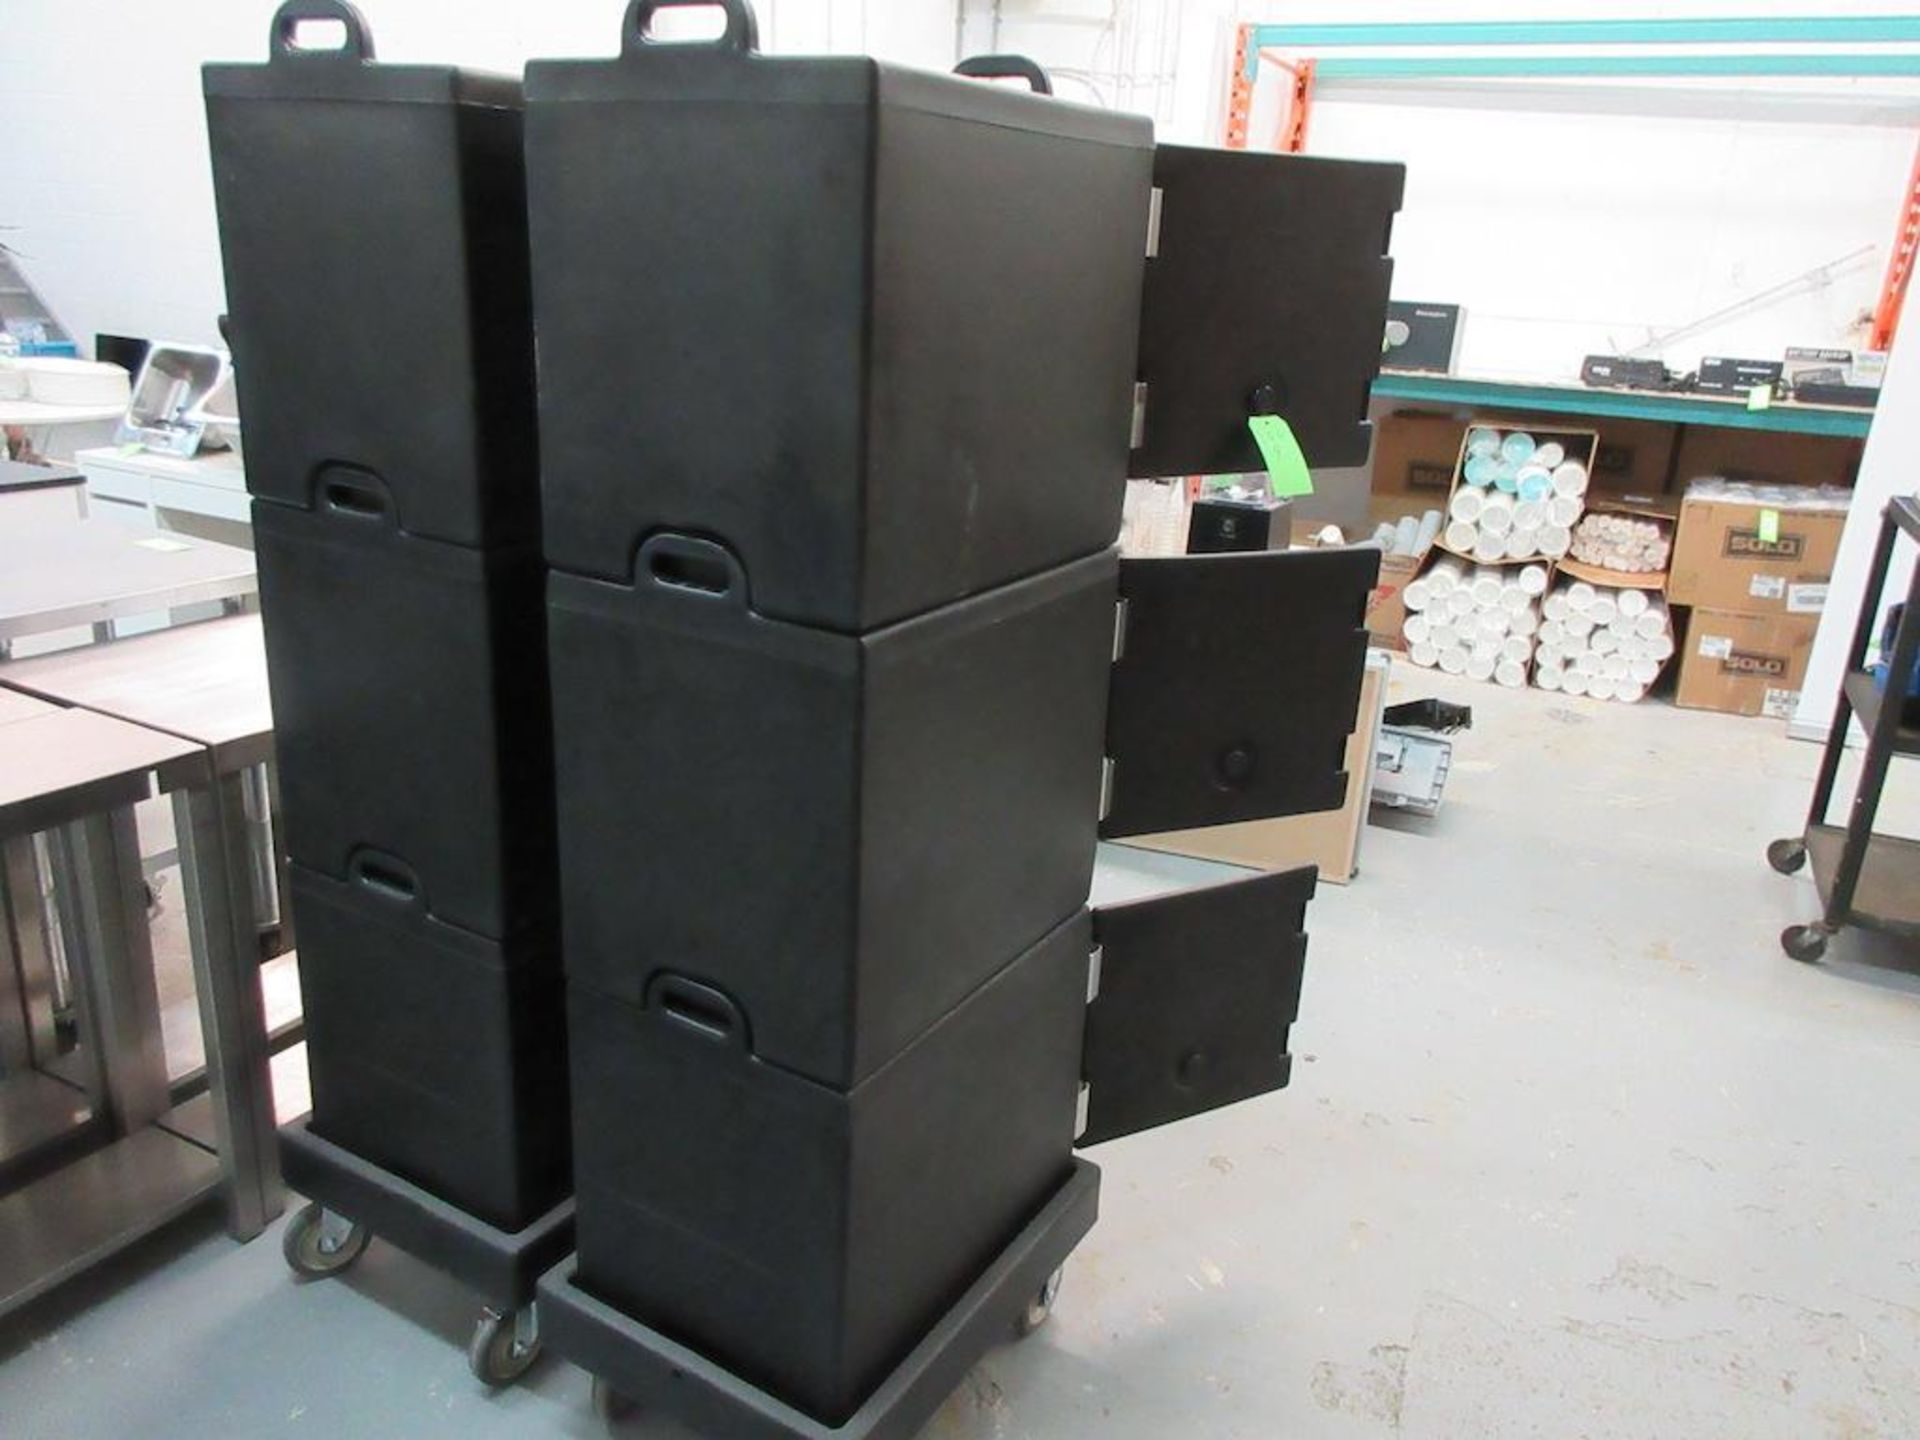 Lot 6 Cambro insulated transporters, 17"w x 24"d x 20"h, adjustable shelves, plus 2 rolling bases - Image 6 of 6